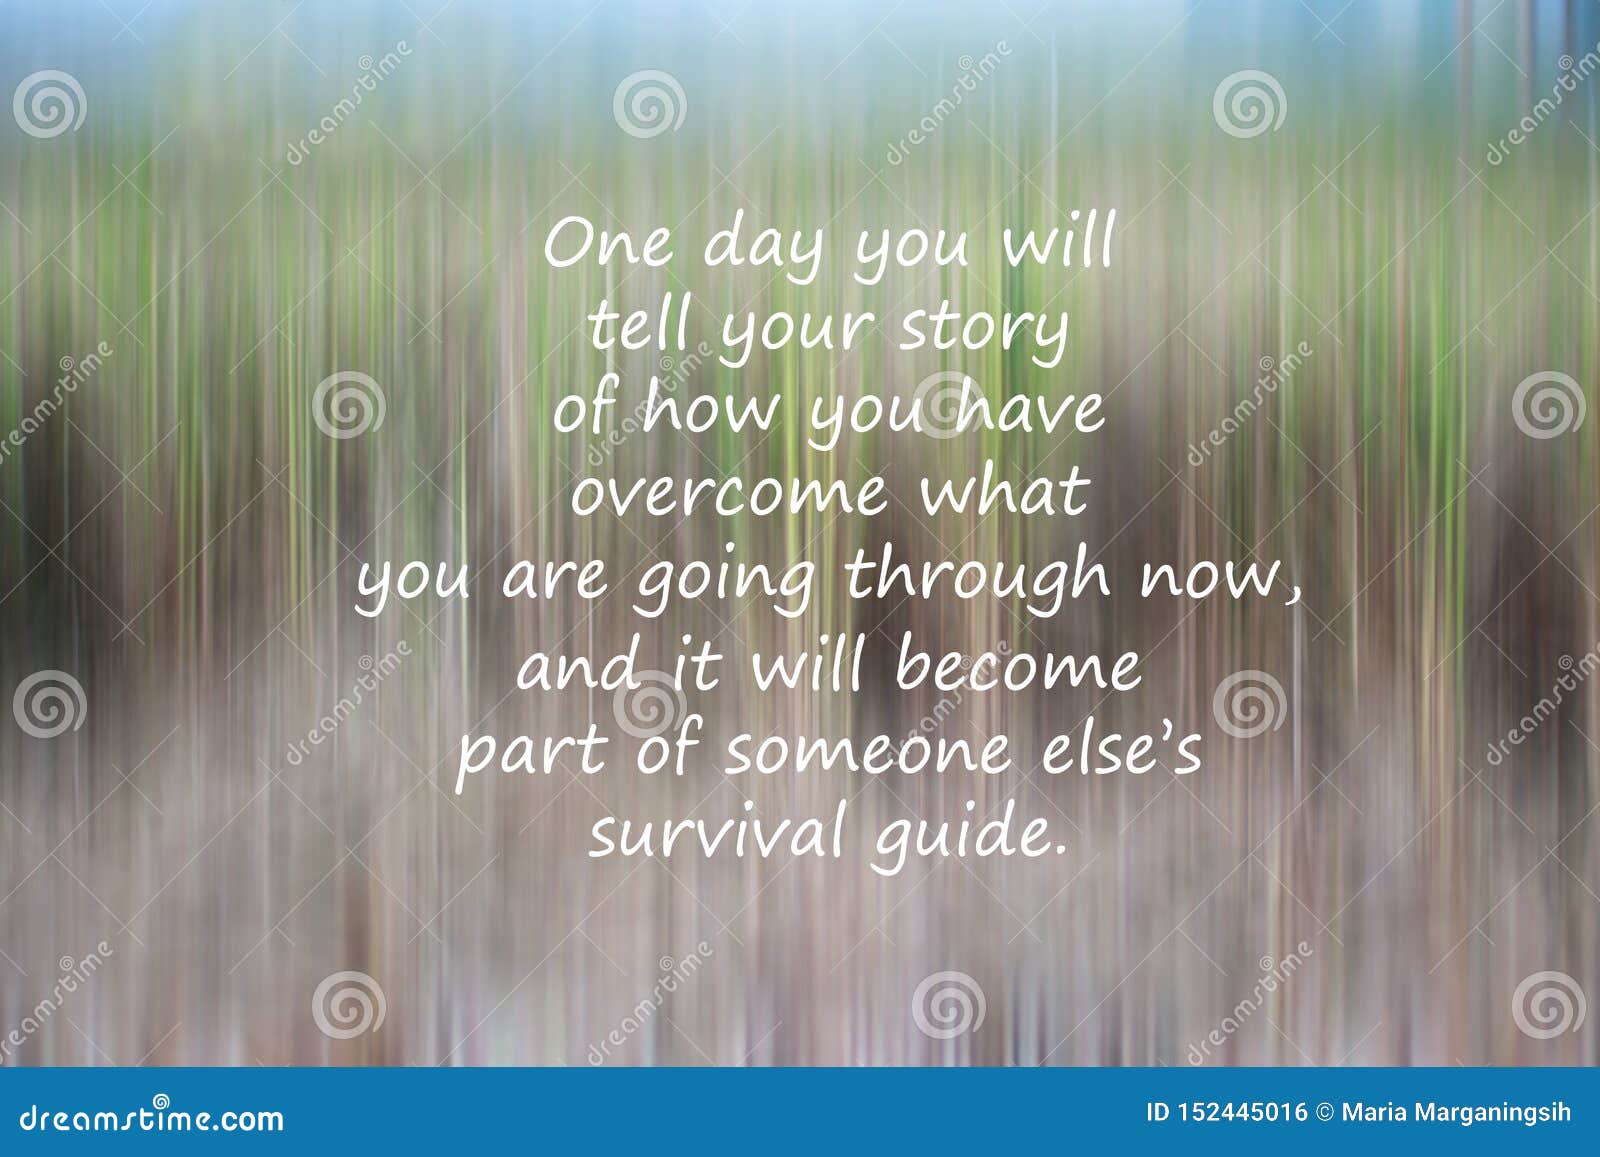 inspirational motivational survival quote - one day you will tell your story of how you have overcome what you are going through